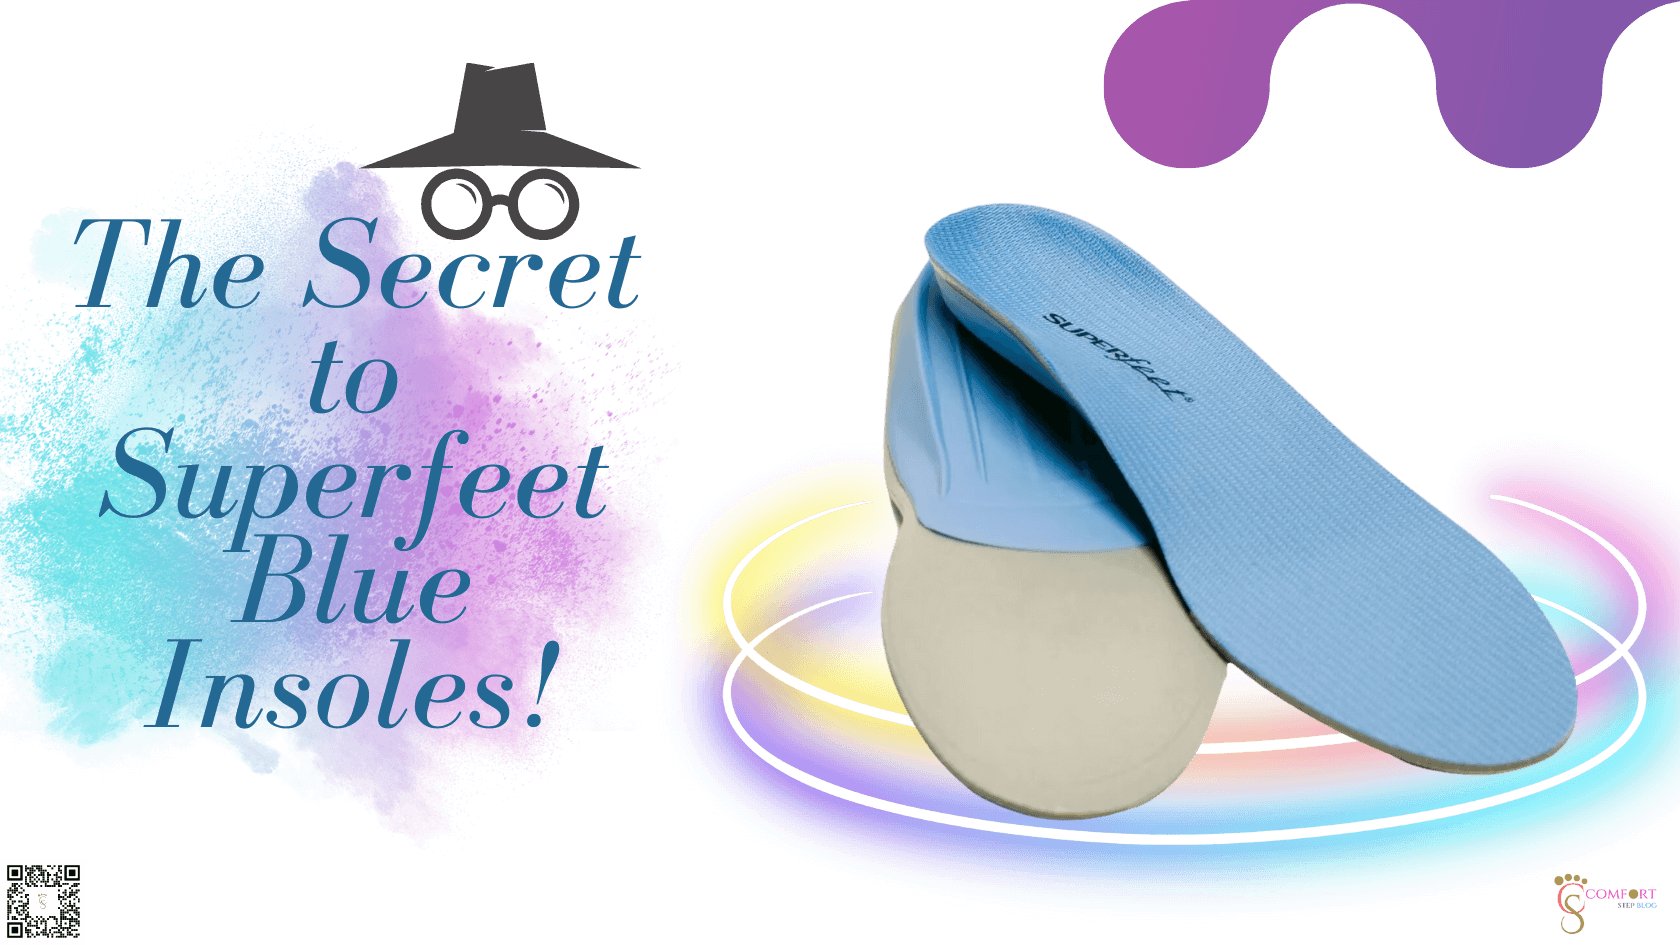 The Secret to Superfeet Blue Insoles